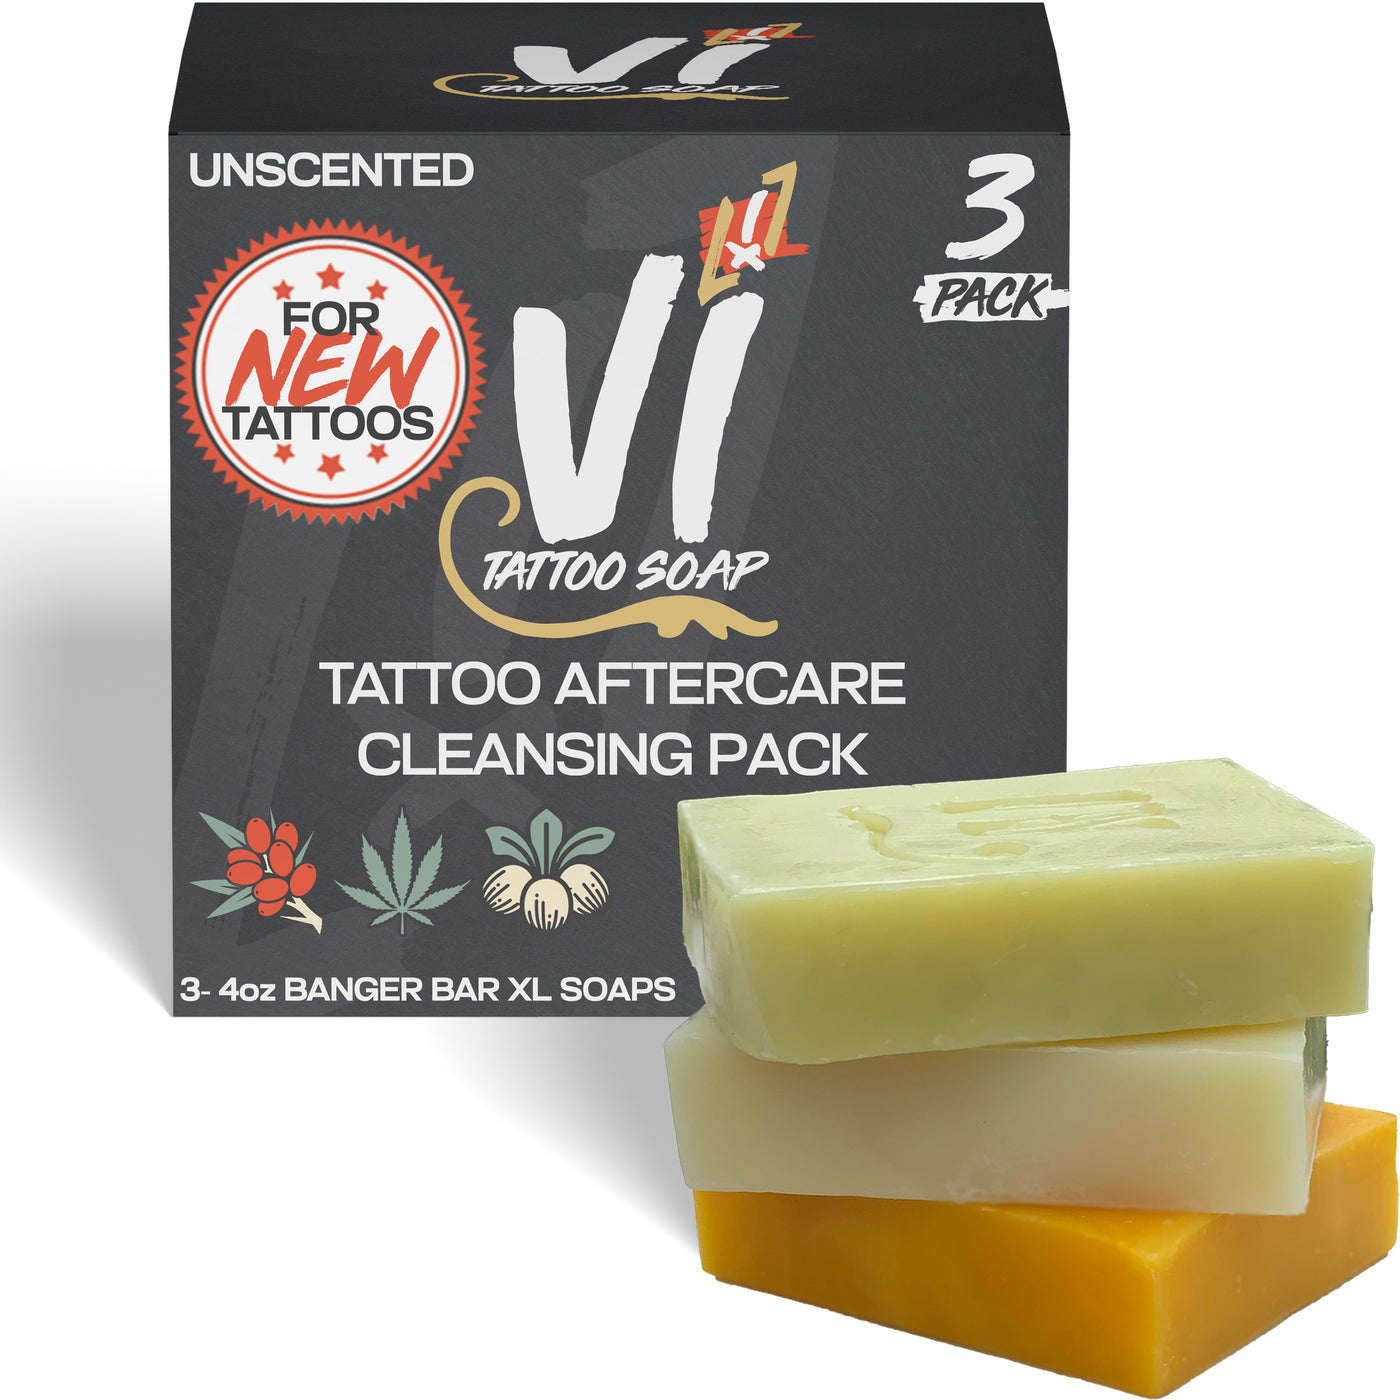 Tattoo Aftercare Cleansing Pack